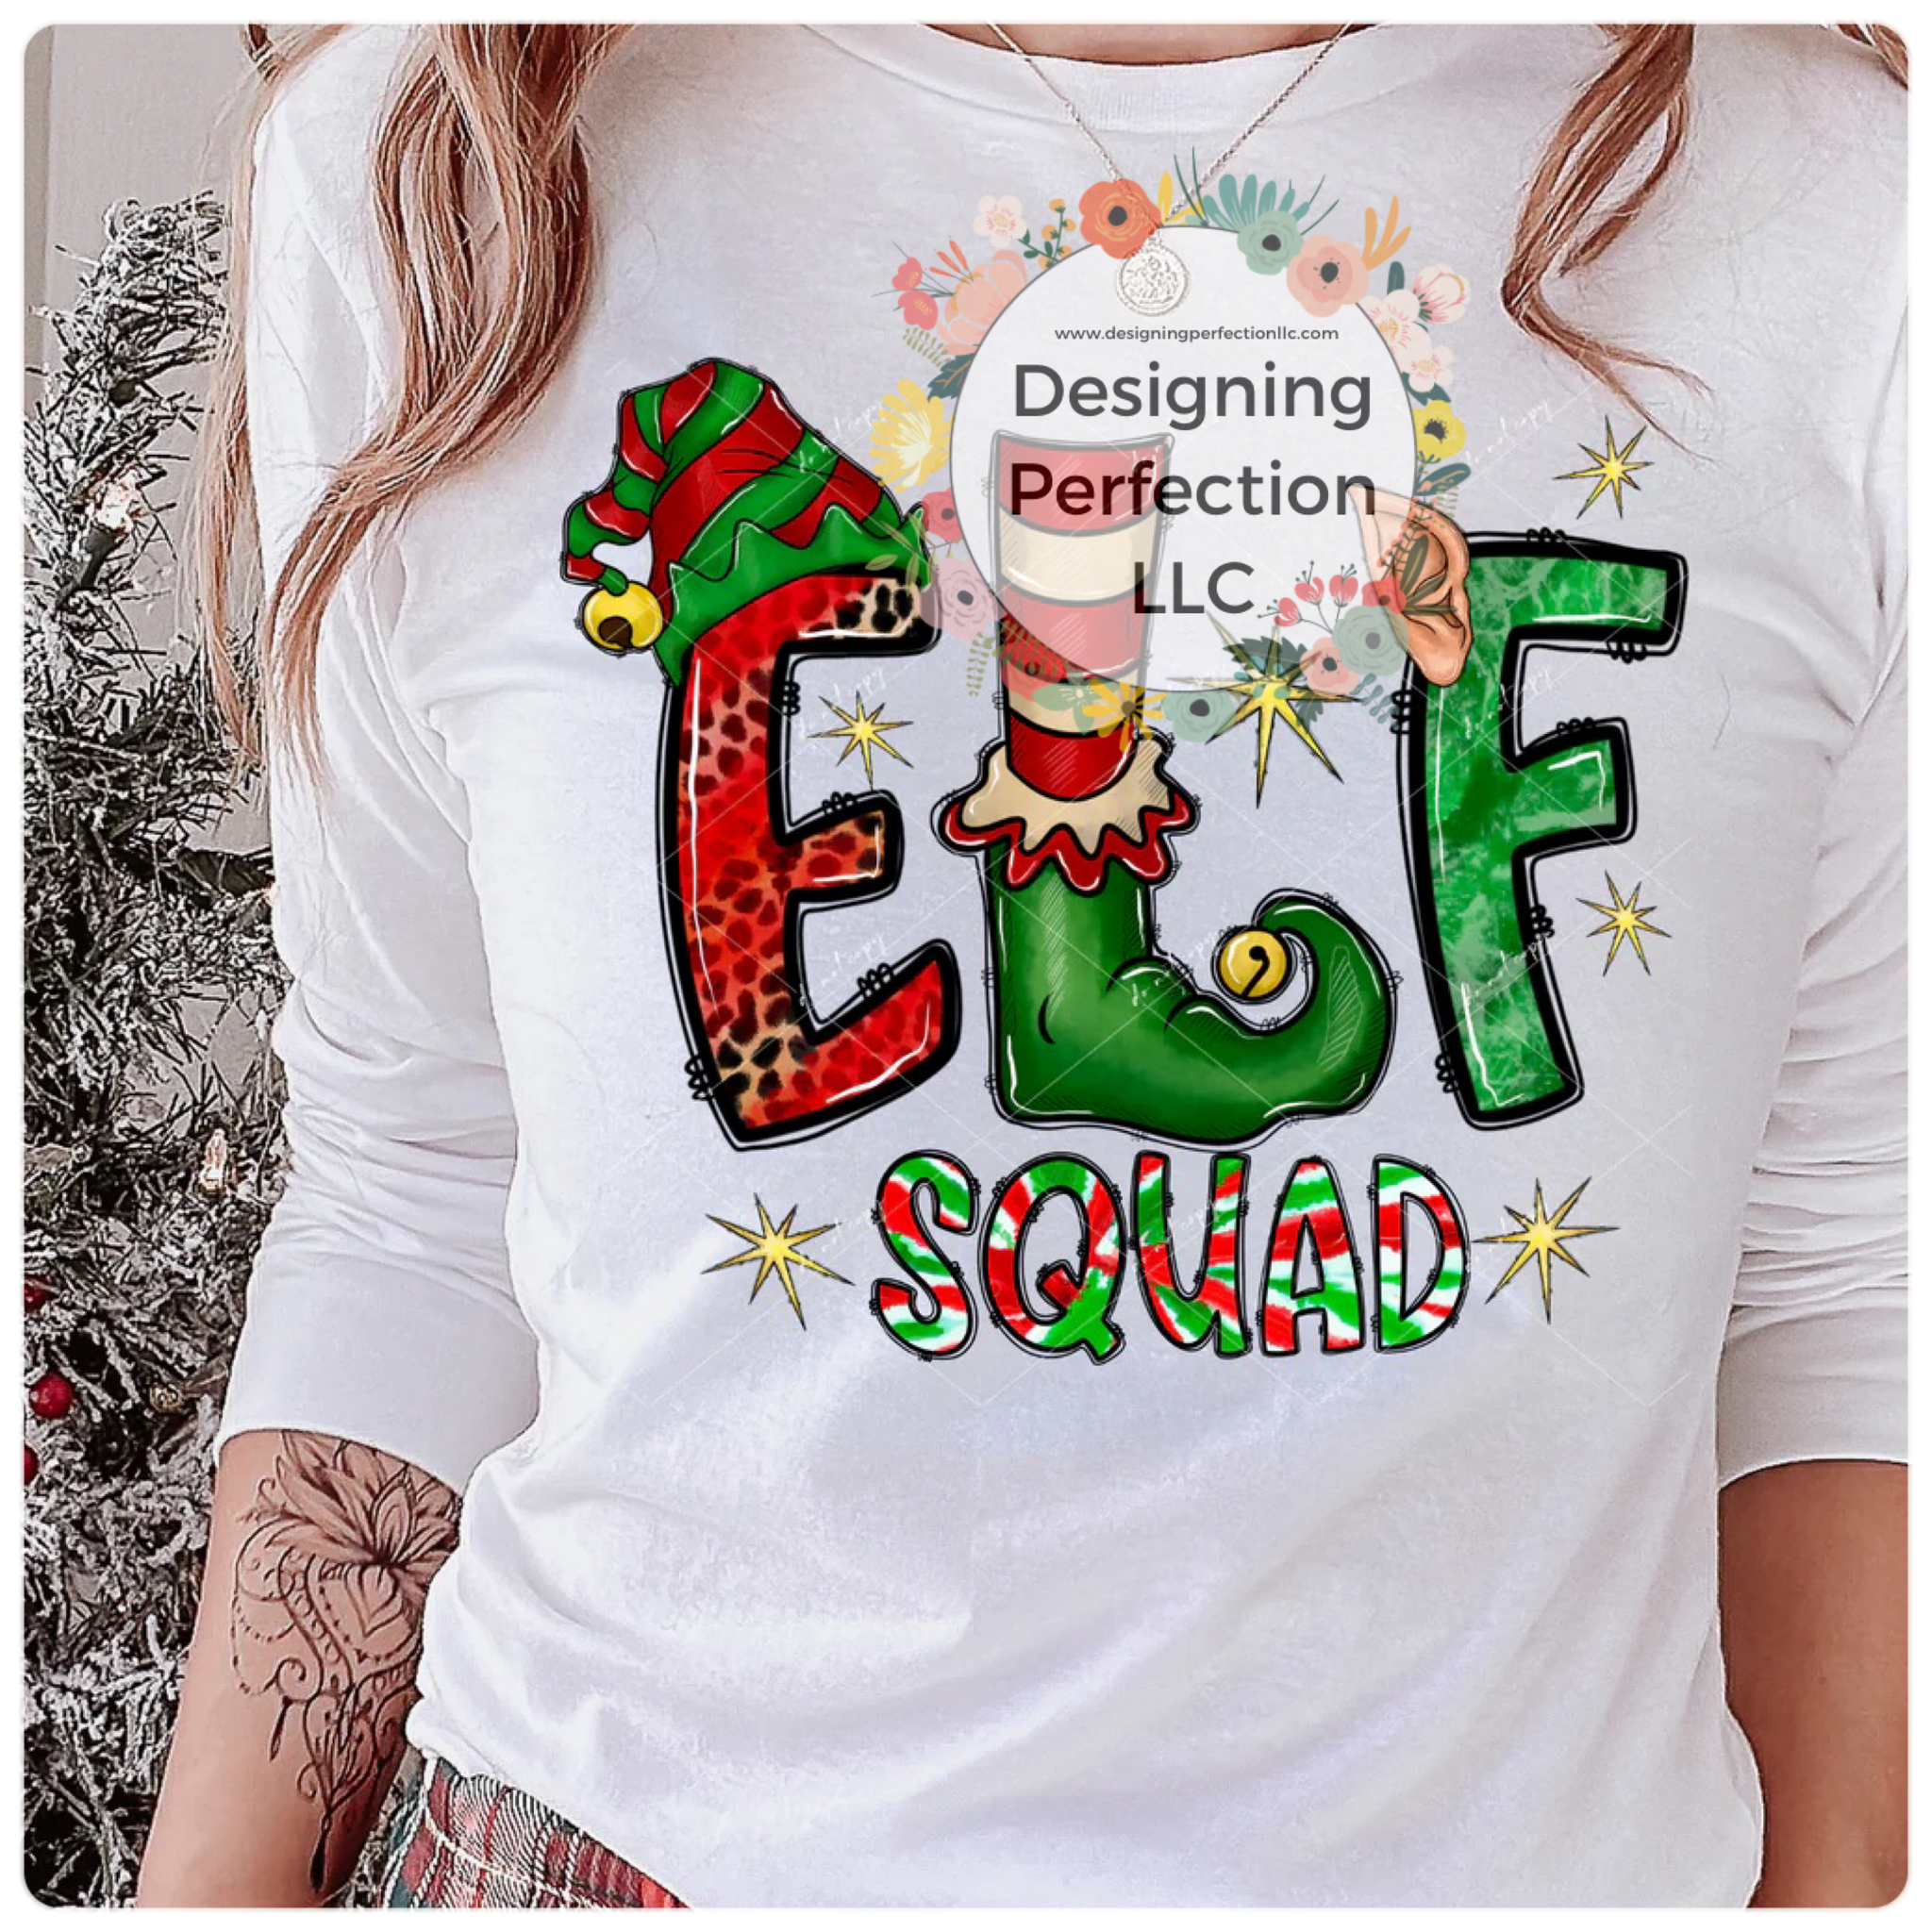 Elf squad YOUTH - add size in Notes